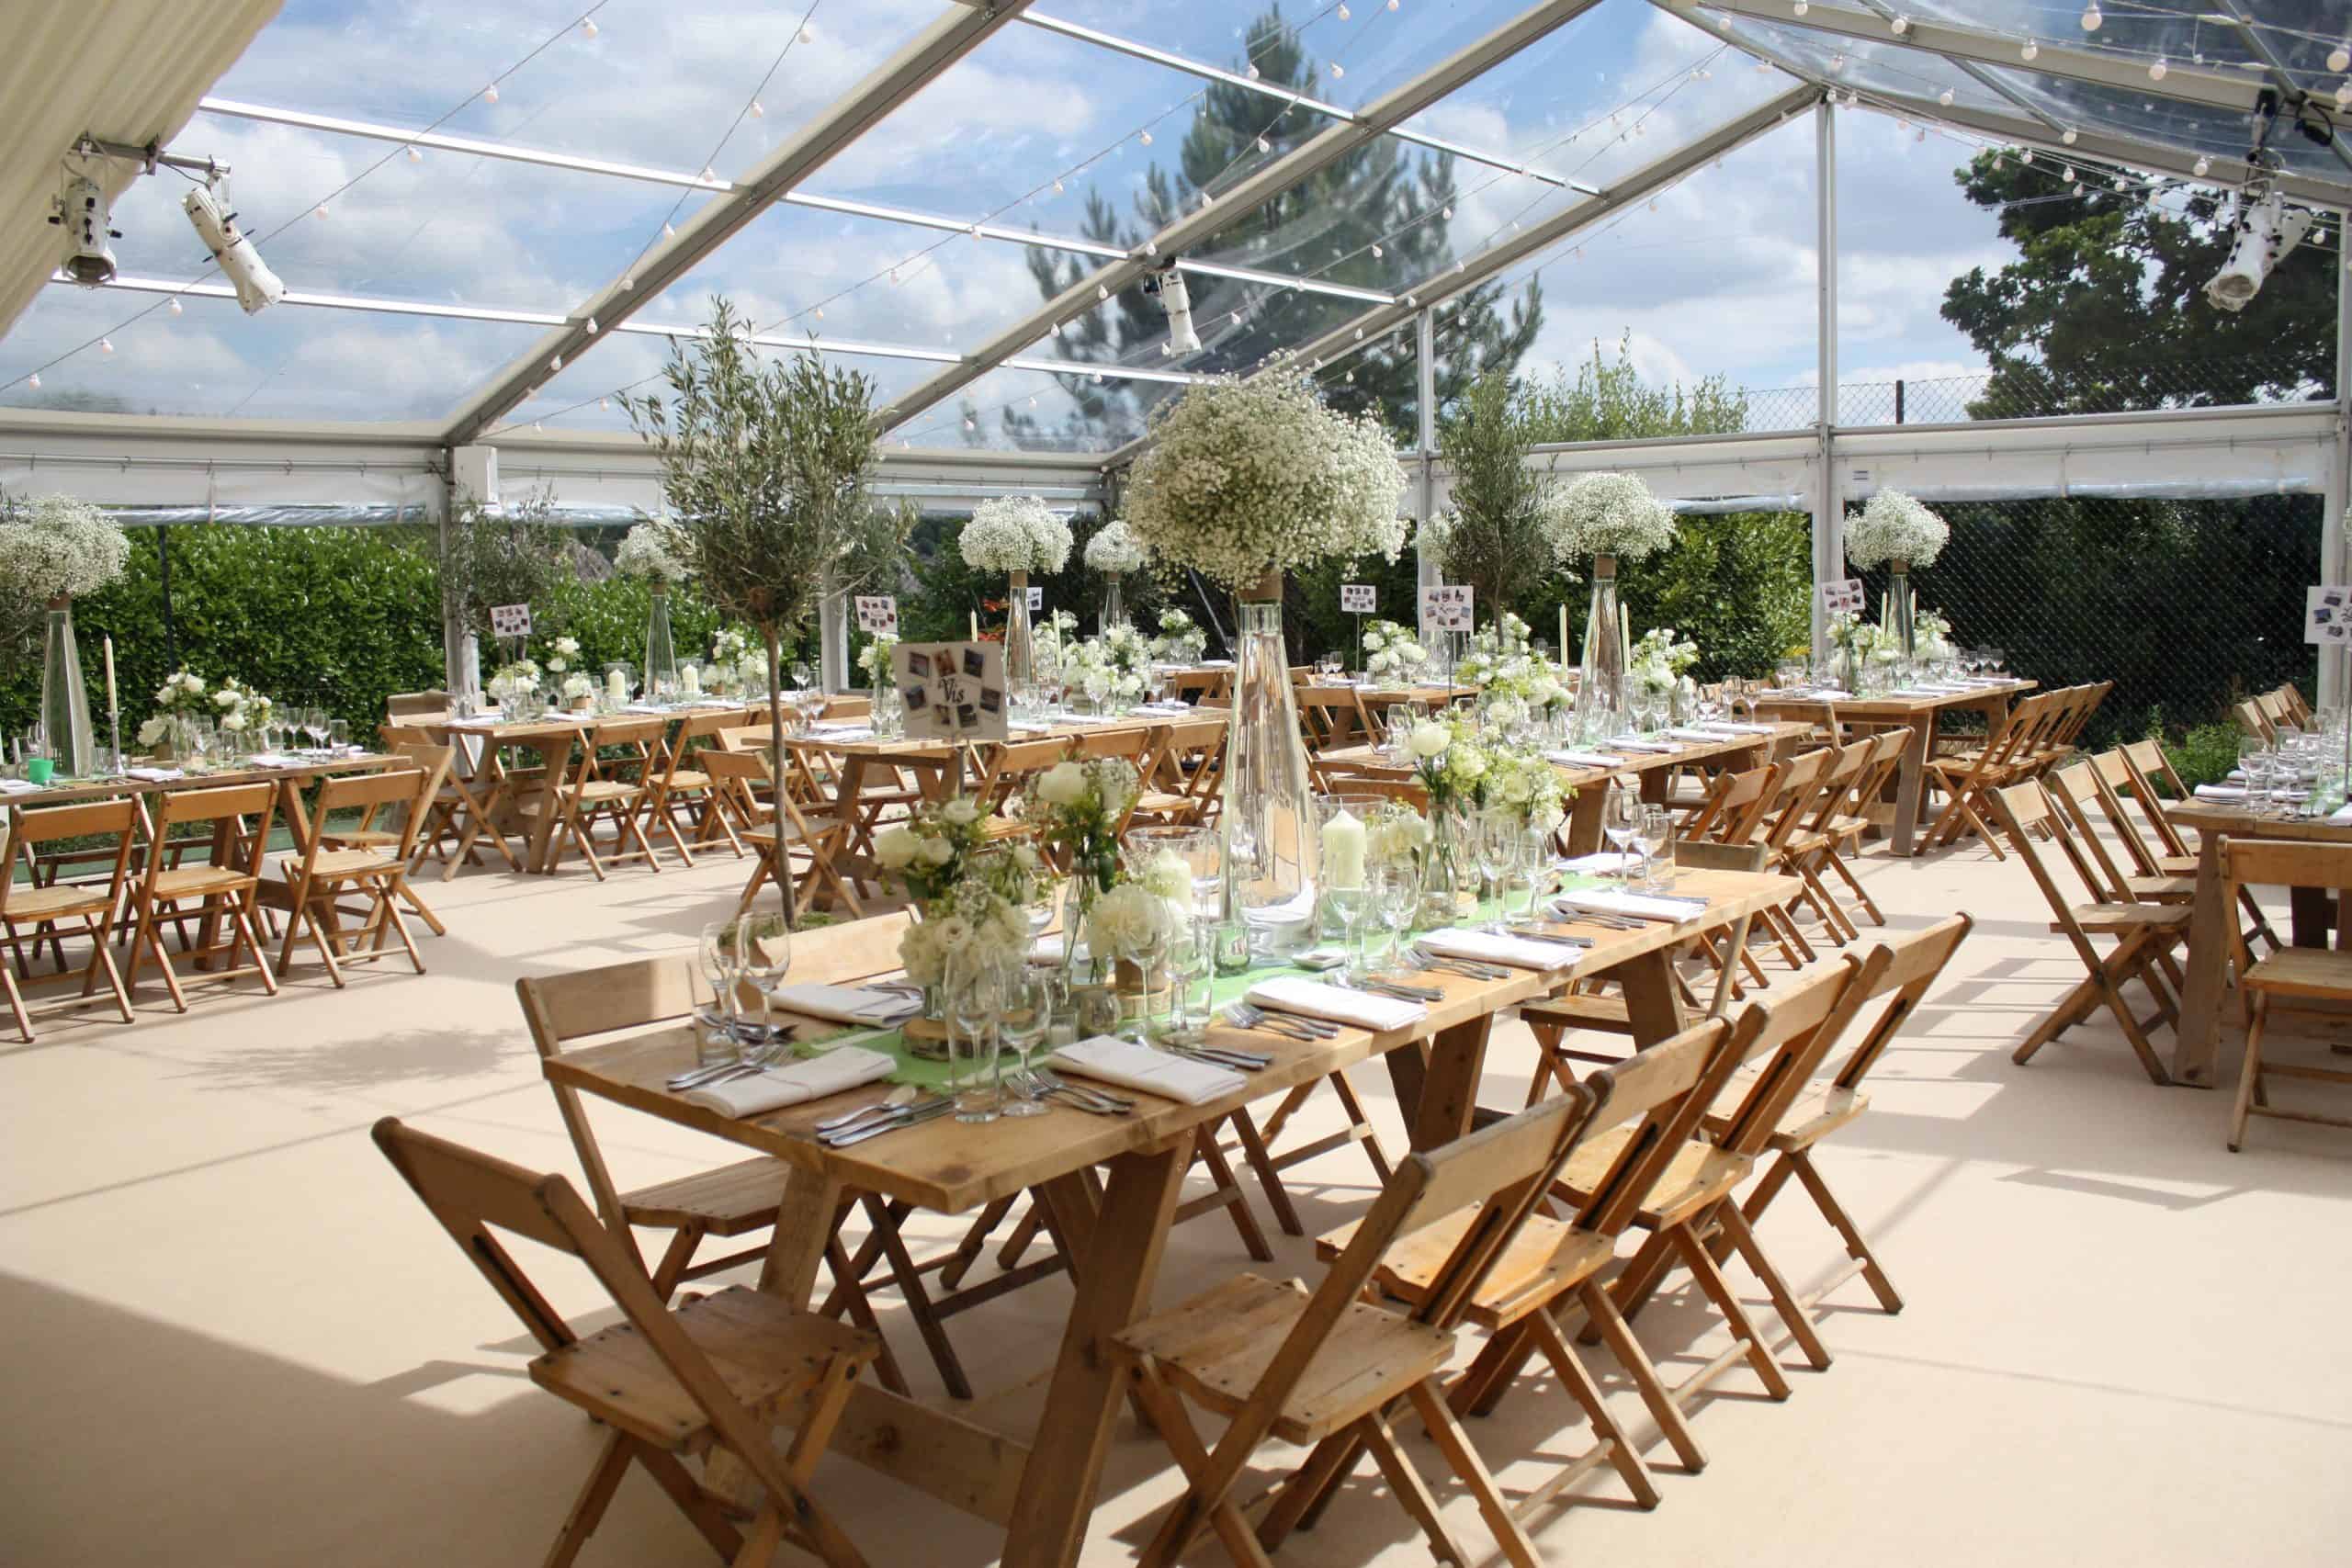 Beautiful Bristol Back Garden Wedding - rustic tables and white floral centrepieces